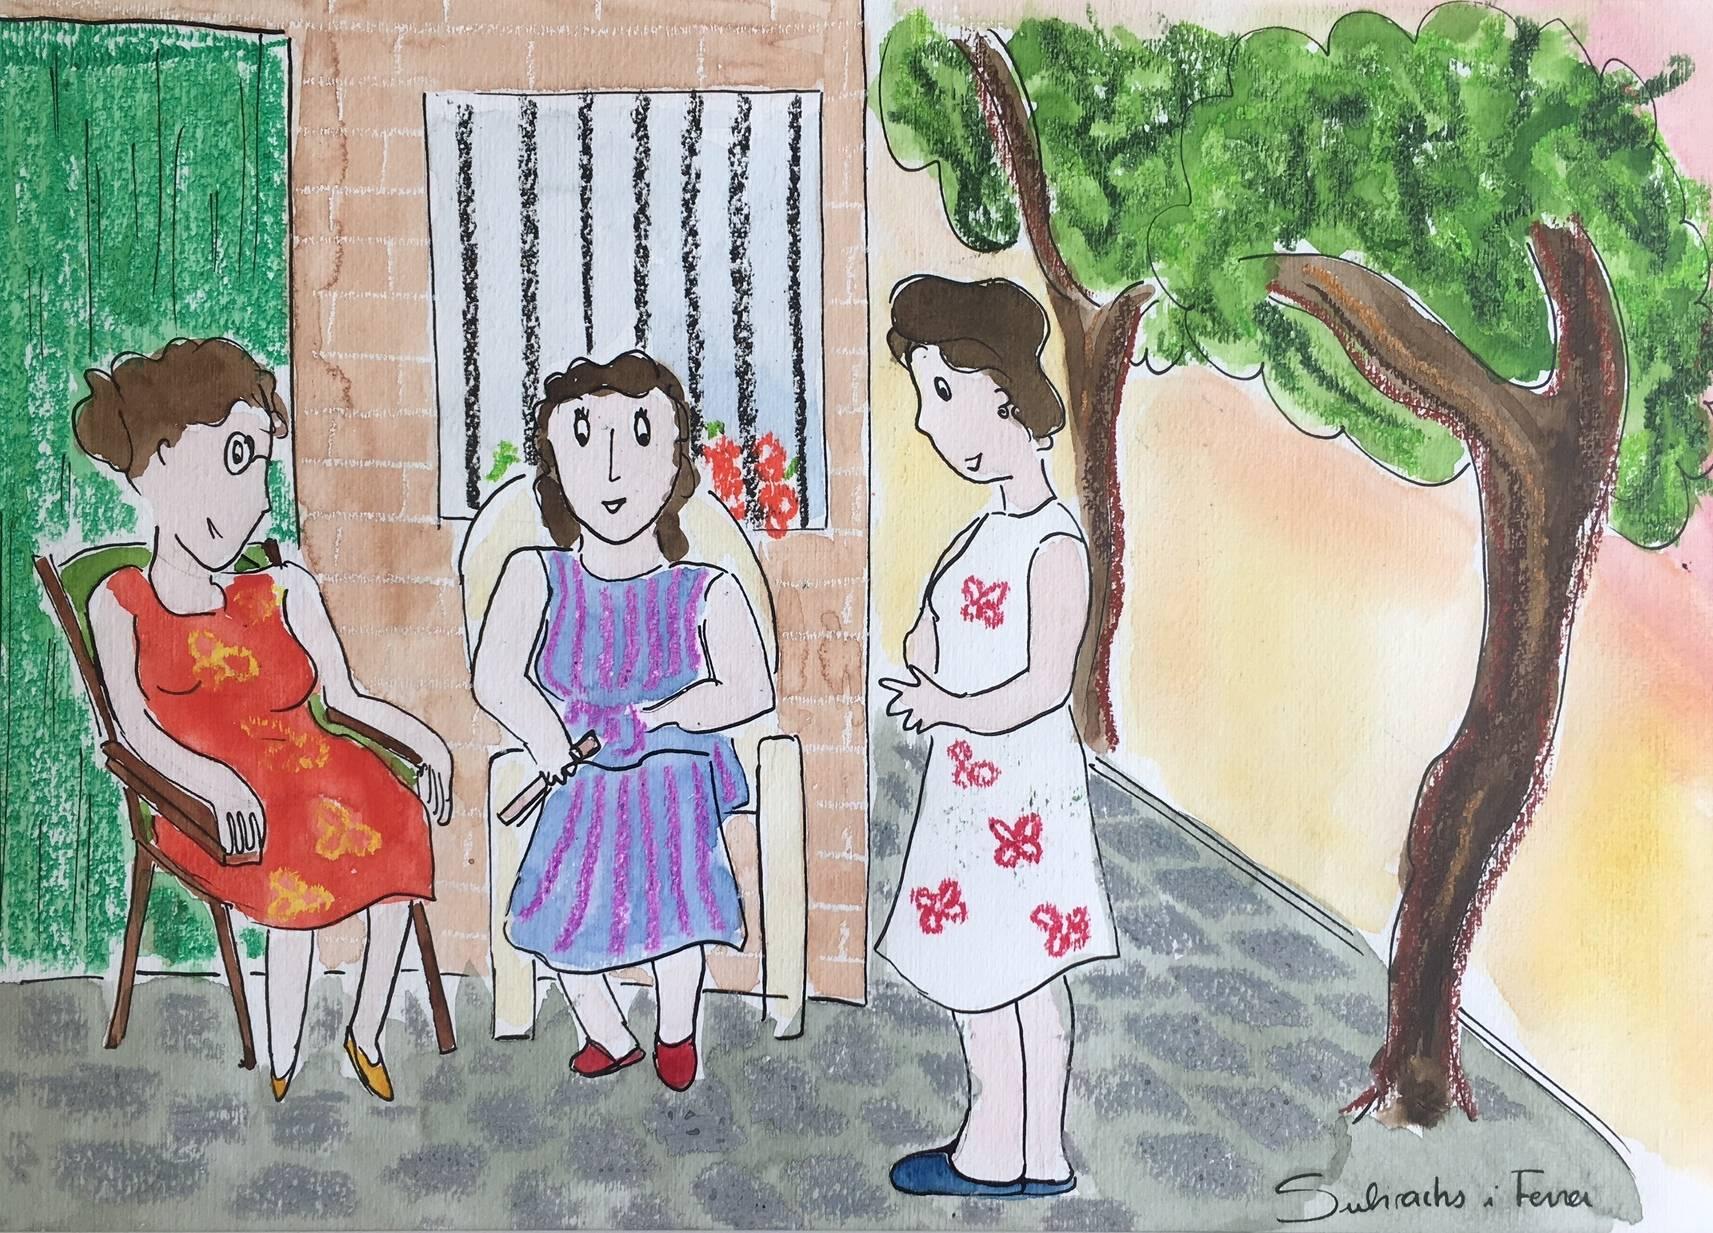 TALK IN THE PARK.original naif watercolor painting  - Painting by Maria Jose Subirachs Ferre